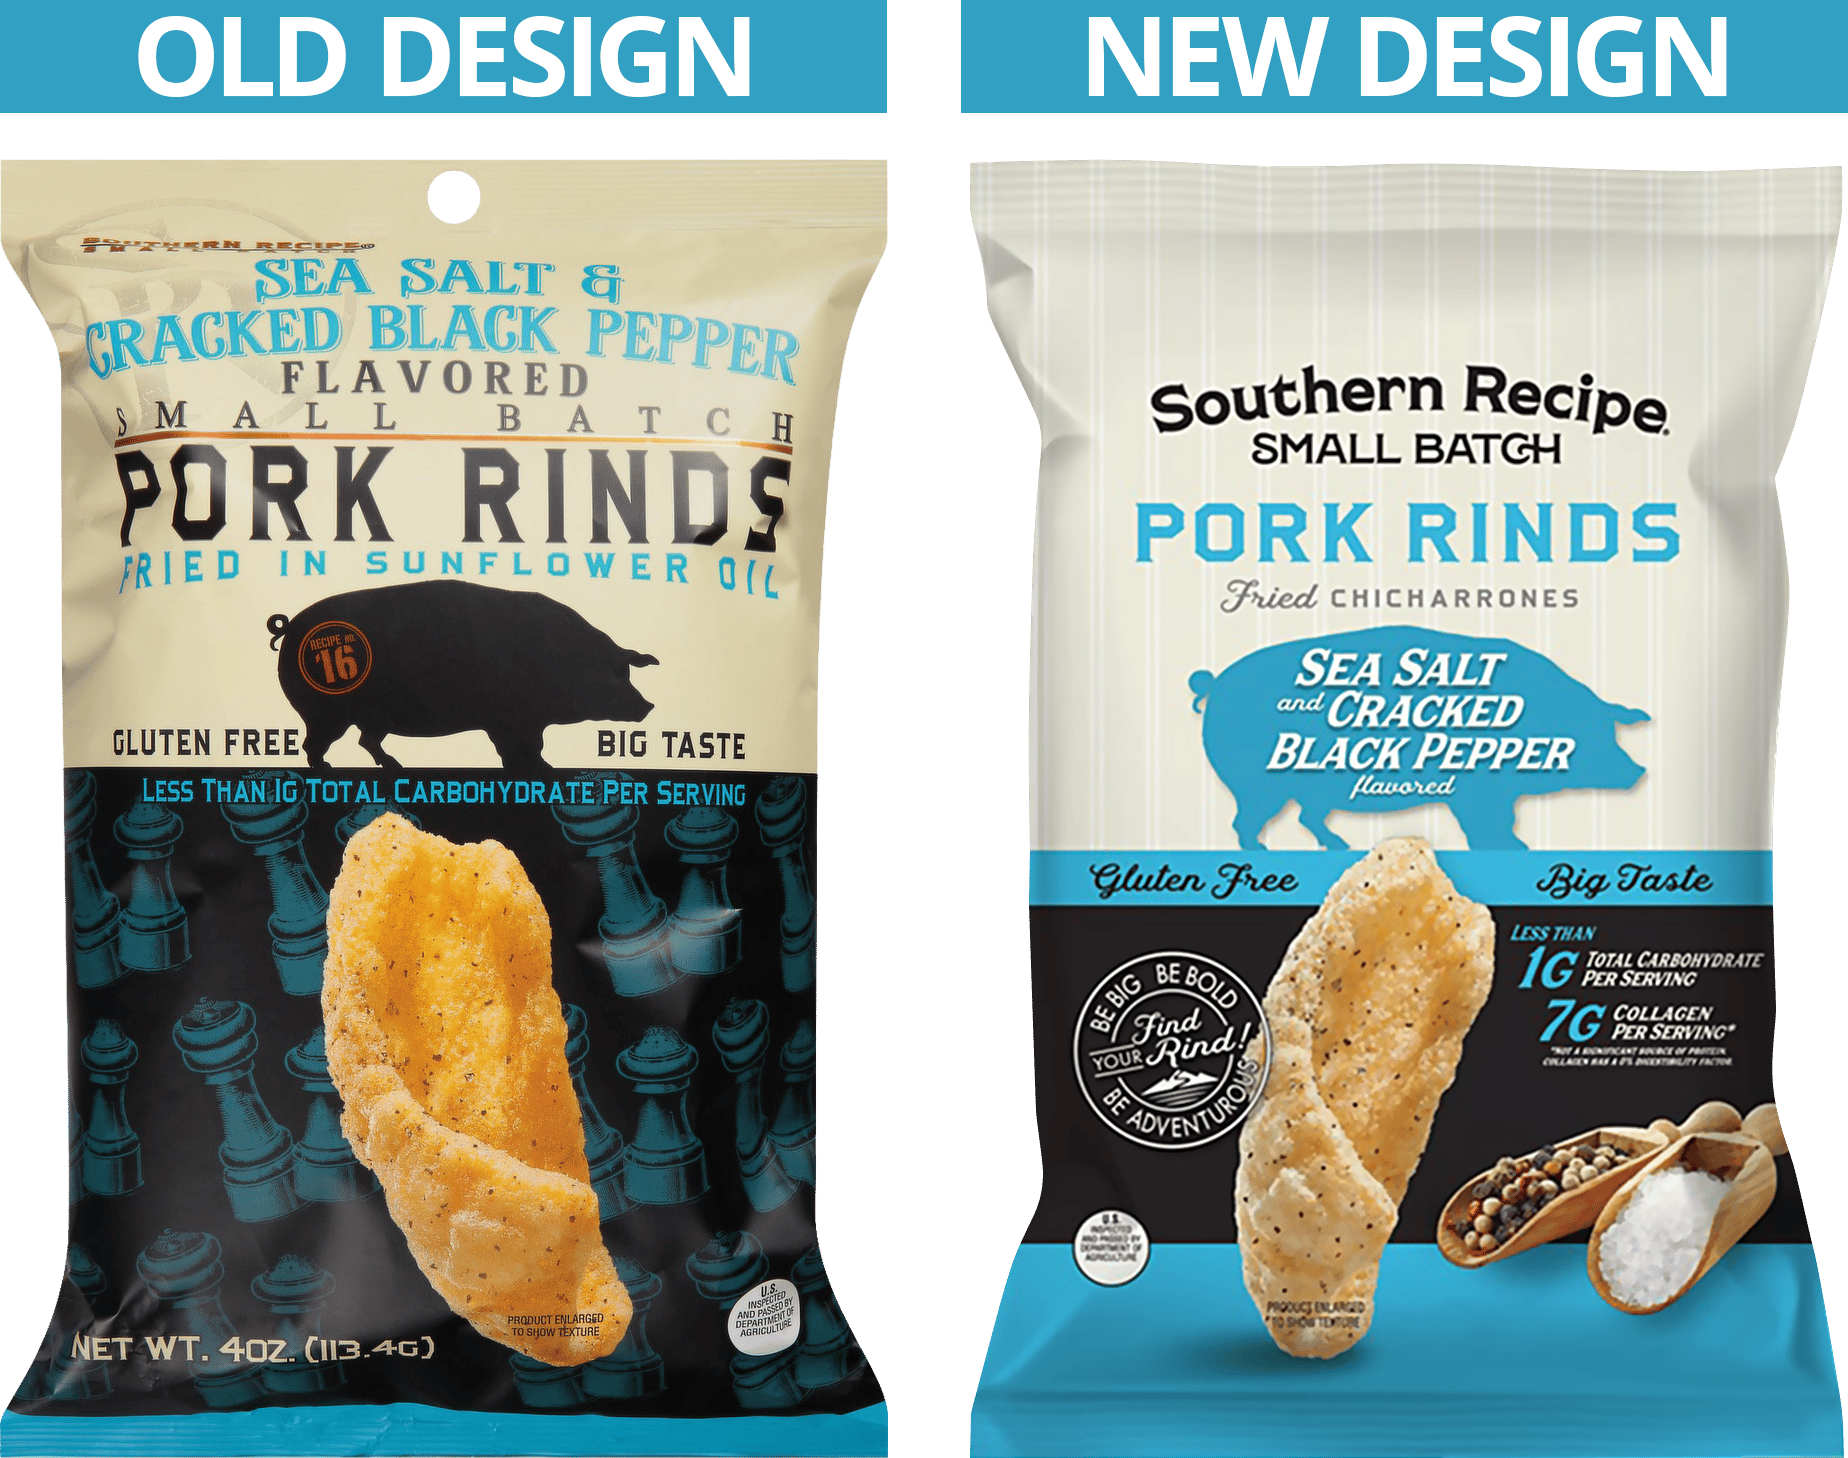 Southern Recipe Small Batch old design and new design side by side